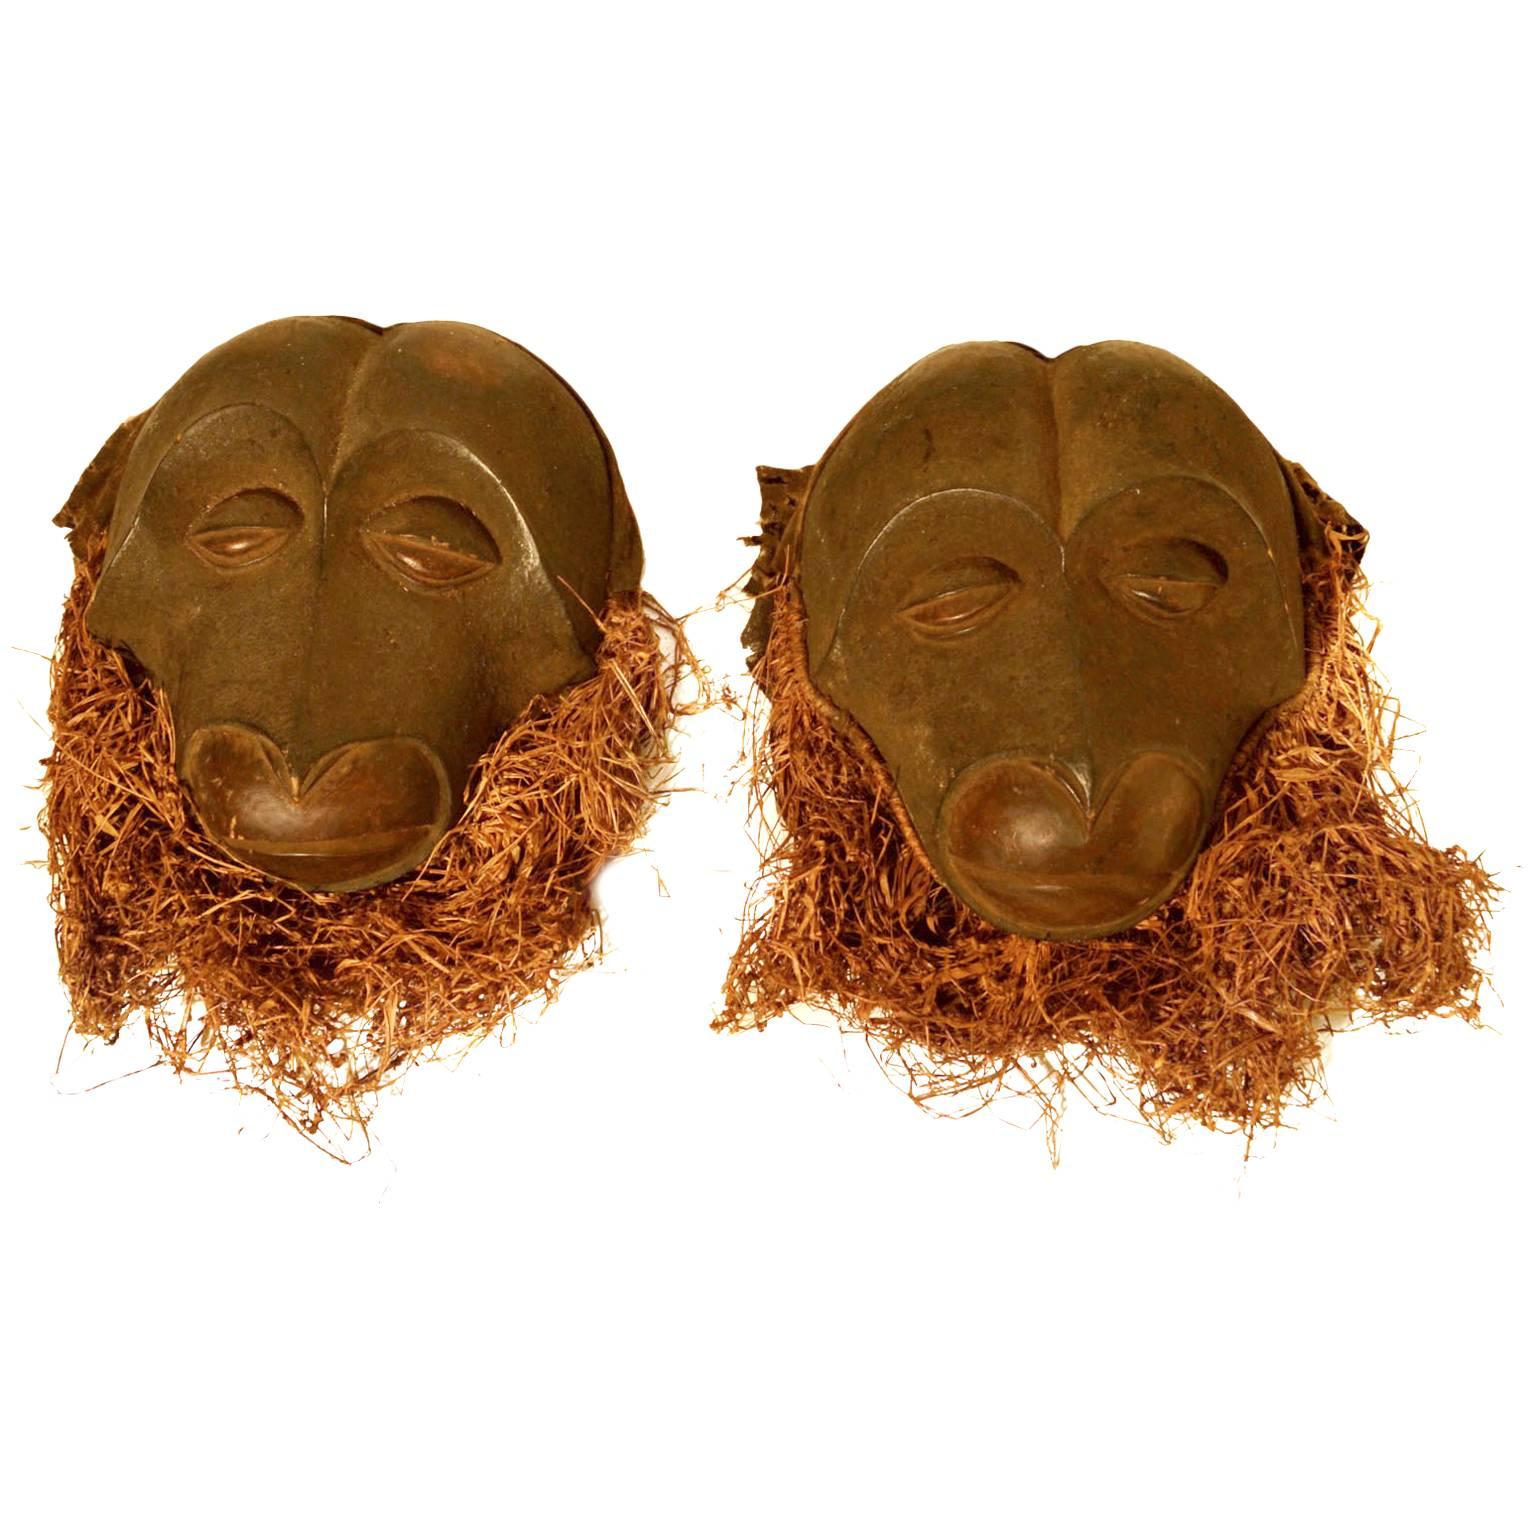 Pair of Sculptural African Monkey Masks Introducing  the Year of the Monkey